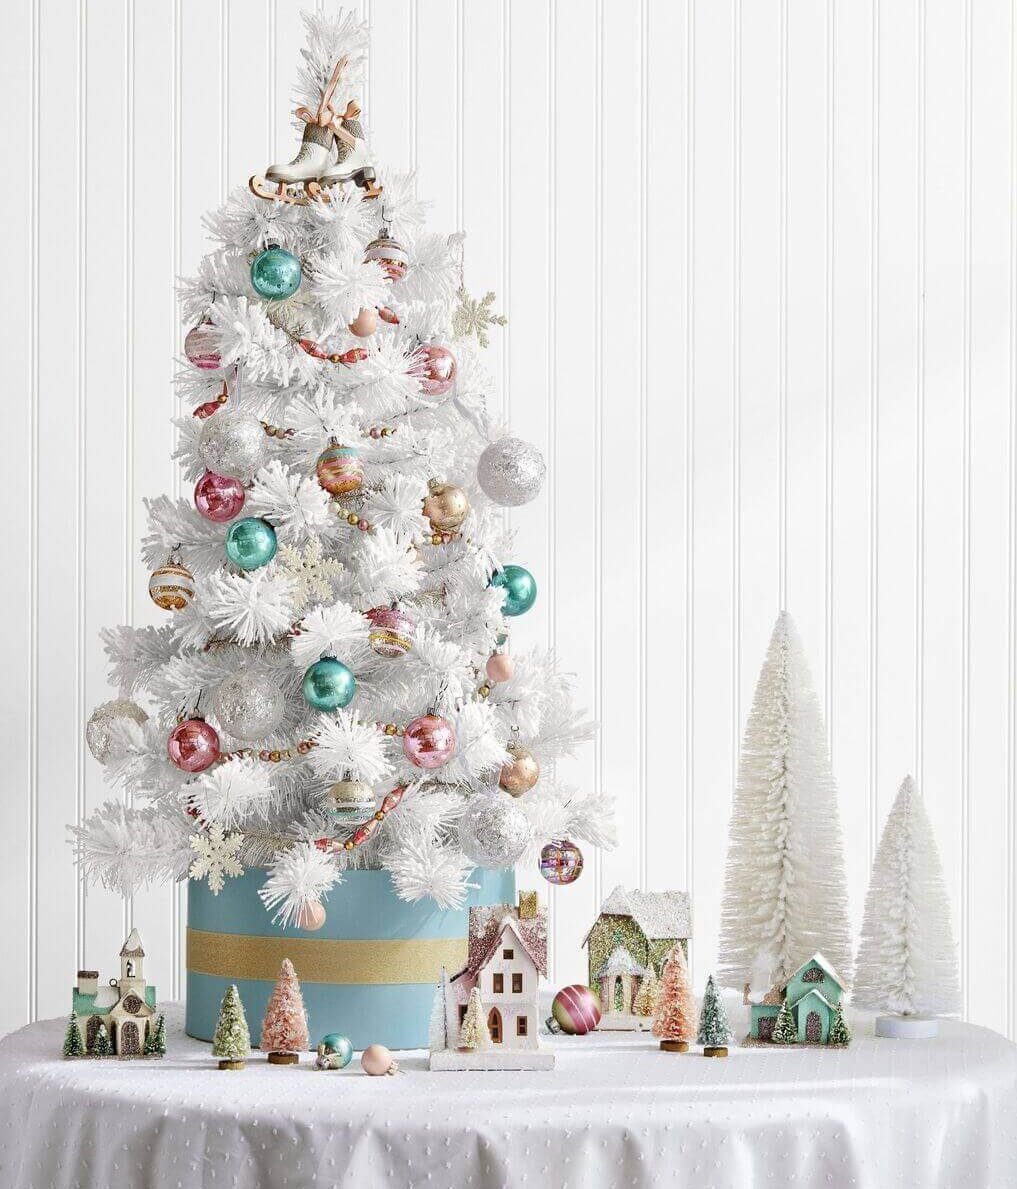 Top 15 Mini Christmas Tree Decorations That Fit in Any Space